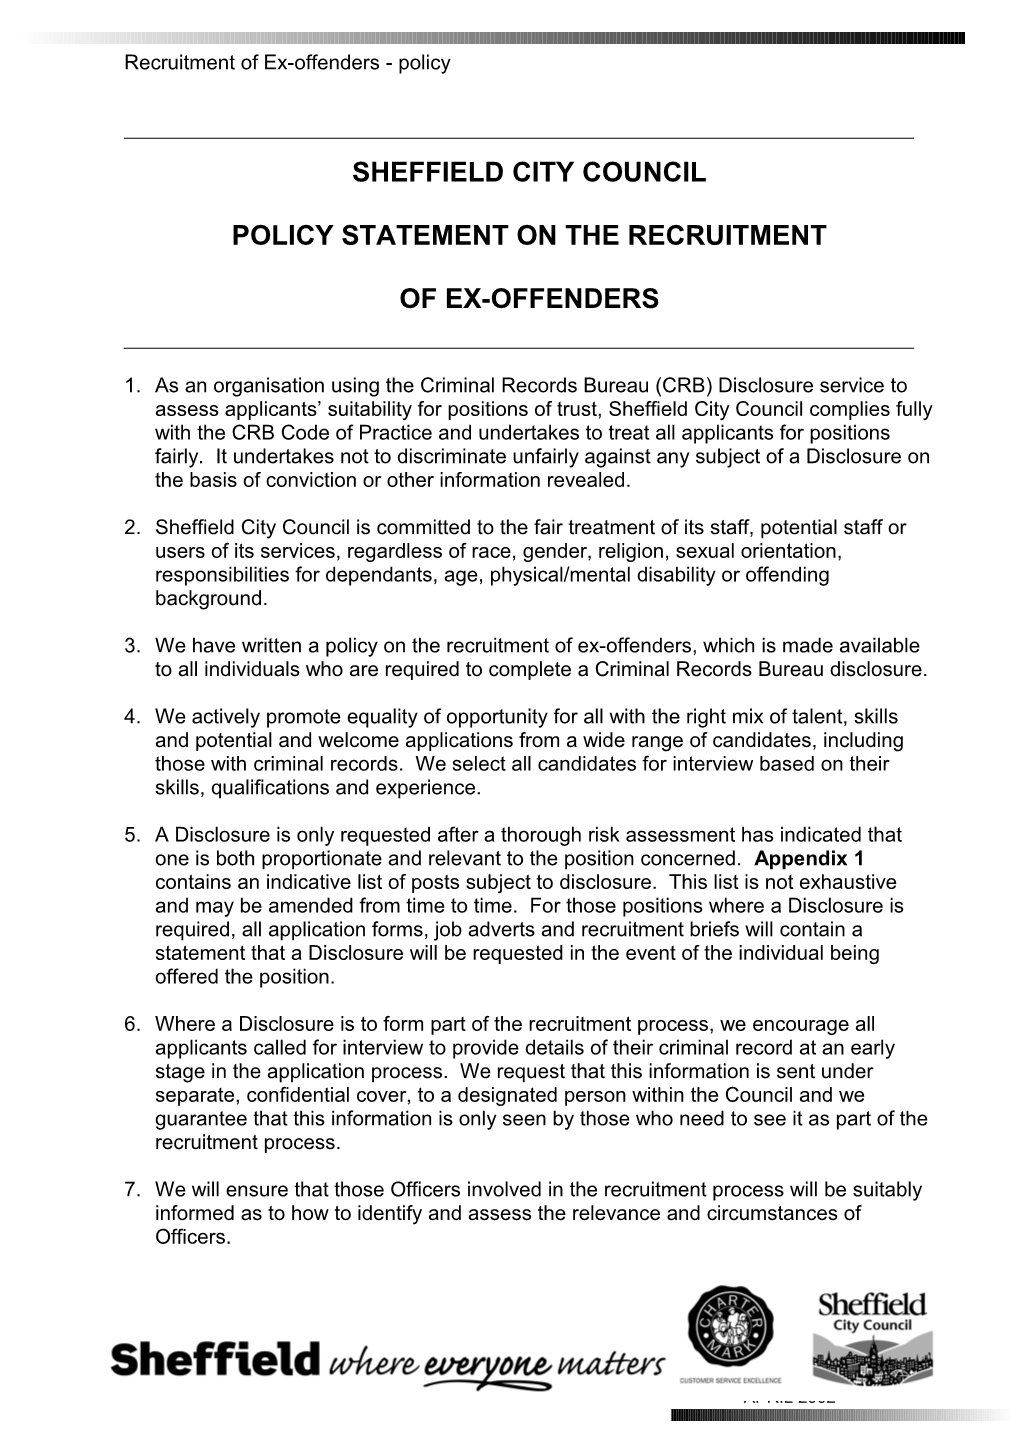 Policy Statement on the Recruitment of Ex-Offenders